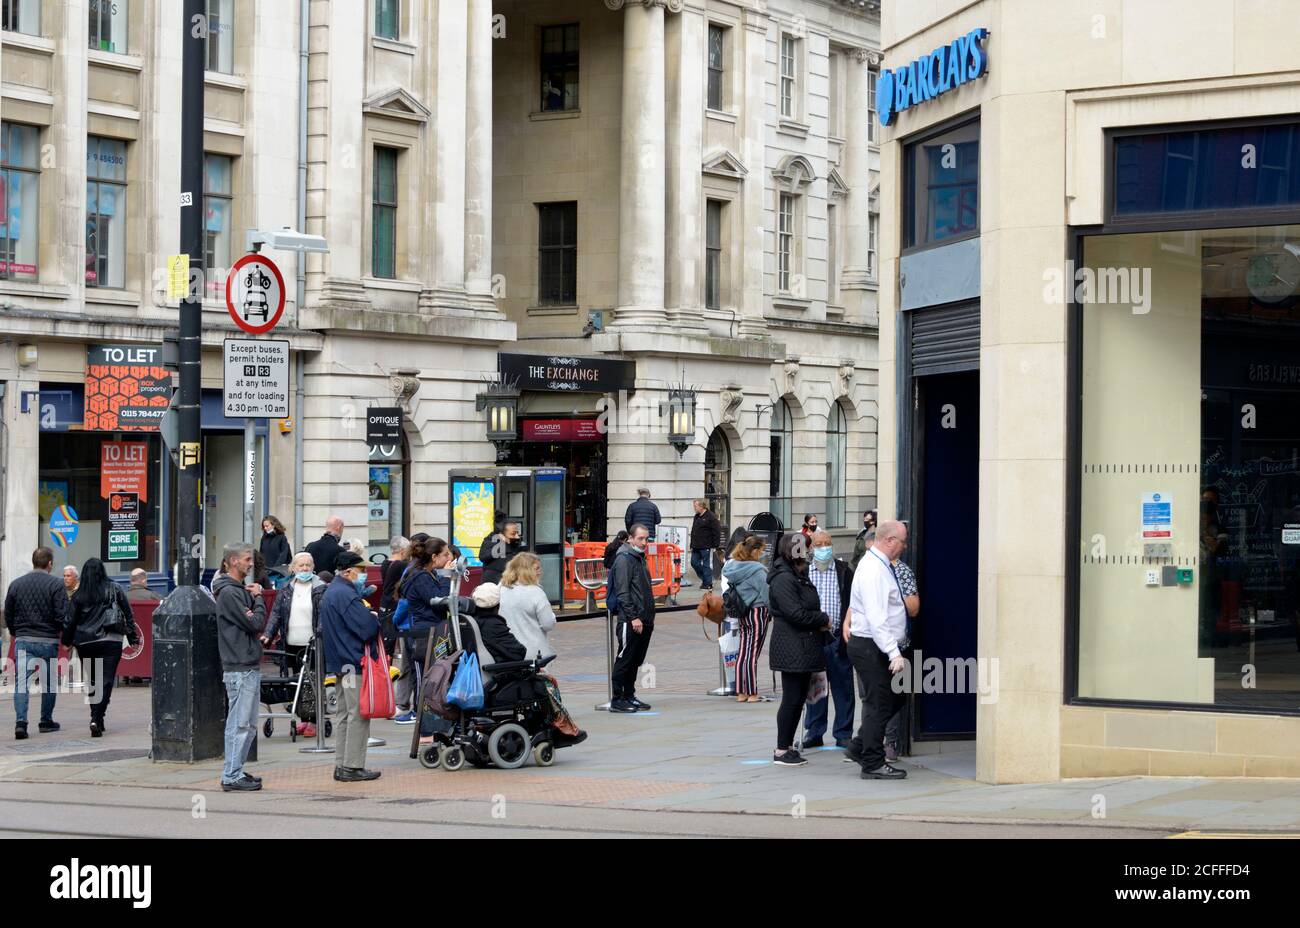 People queueing for Barclays Bank, during Virus outbreak. Stock Photo